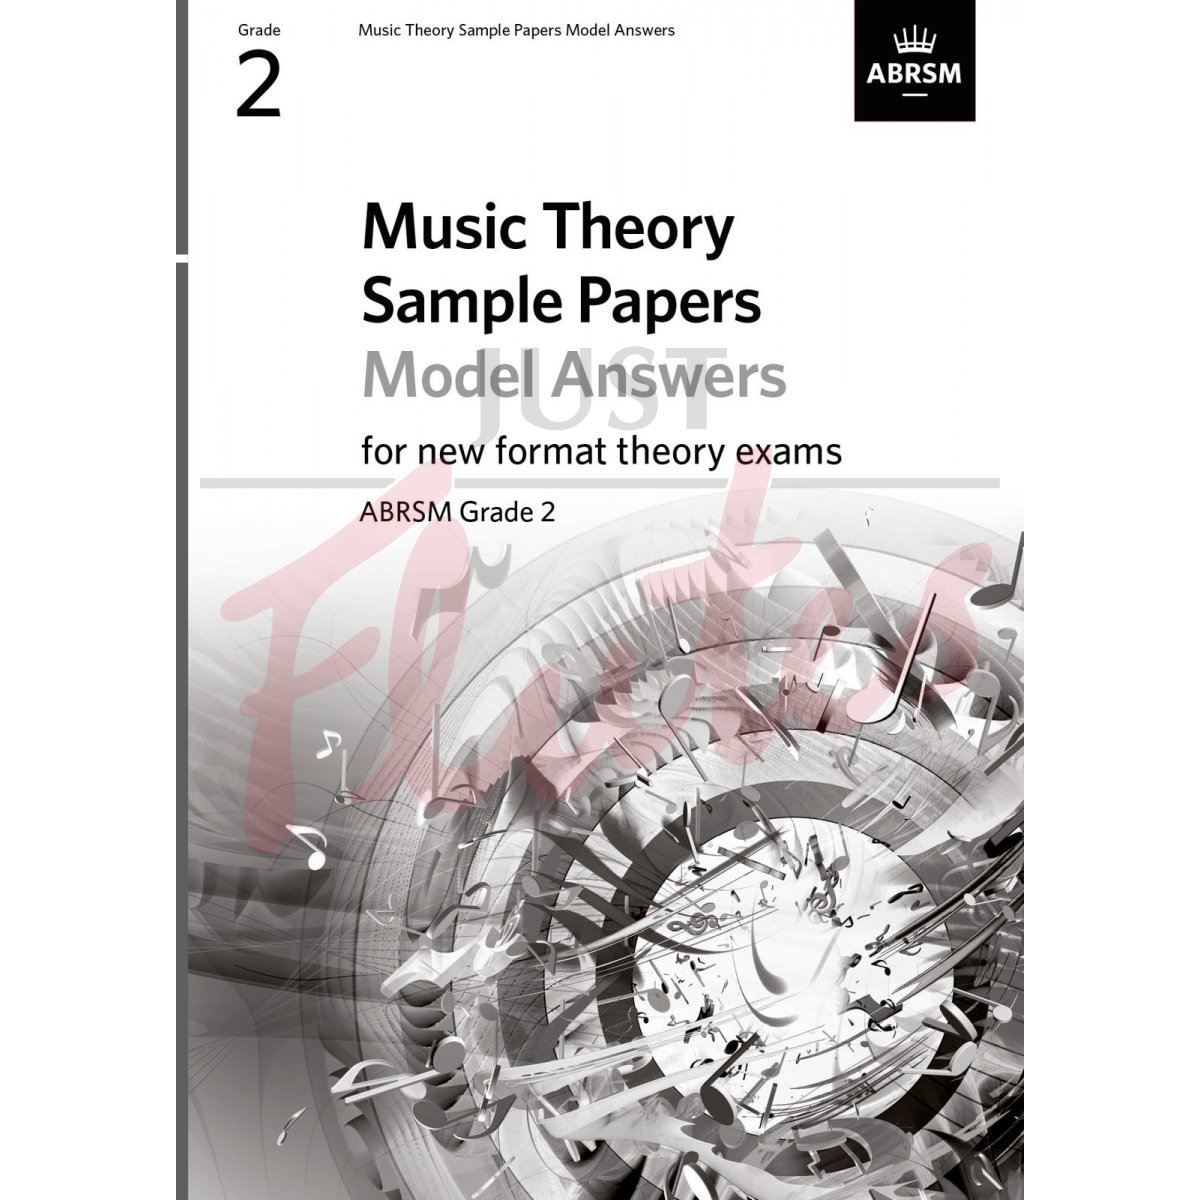 Music Theory Sample Papers Grade 2 - Model Answers